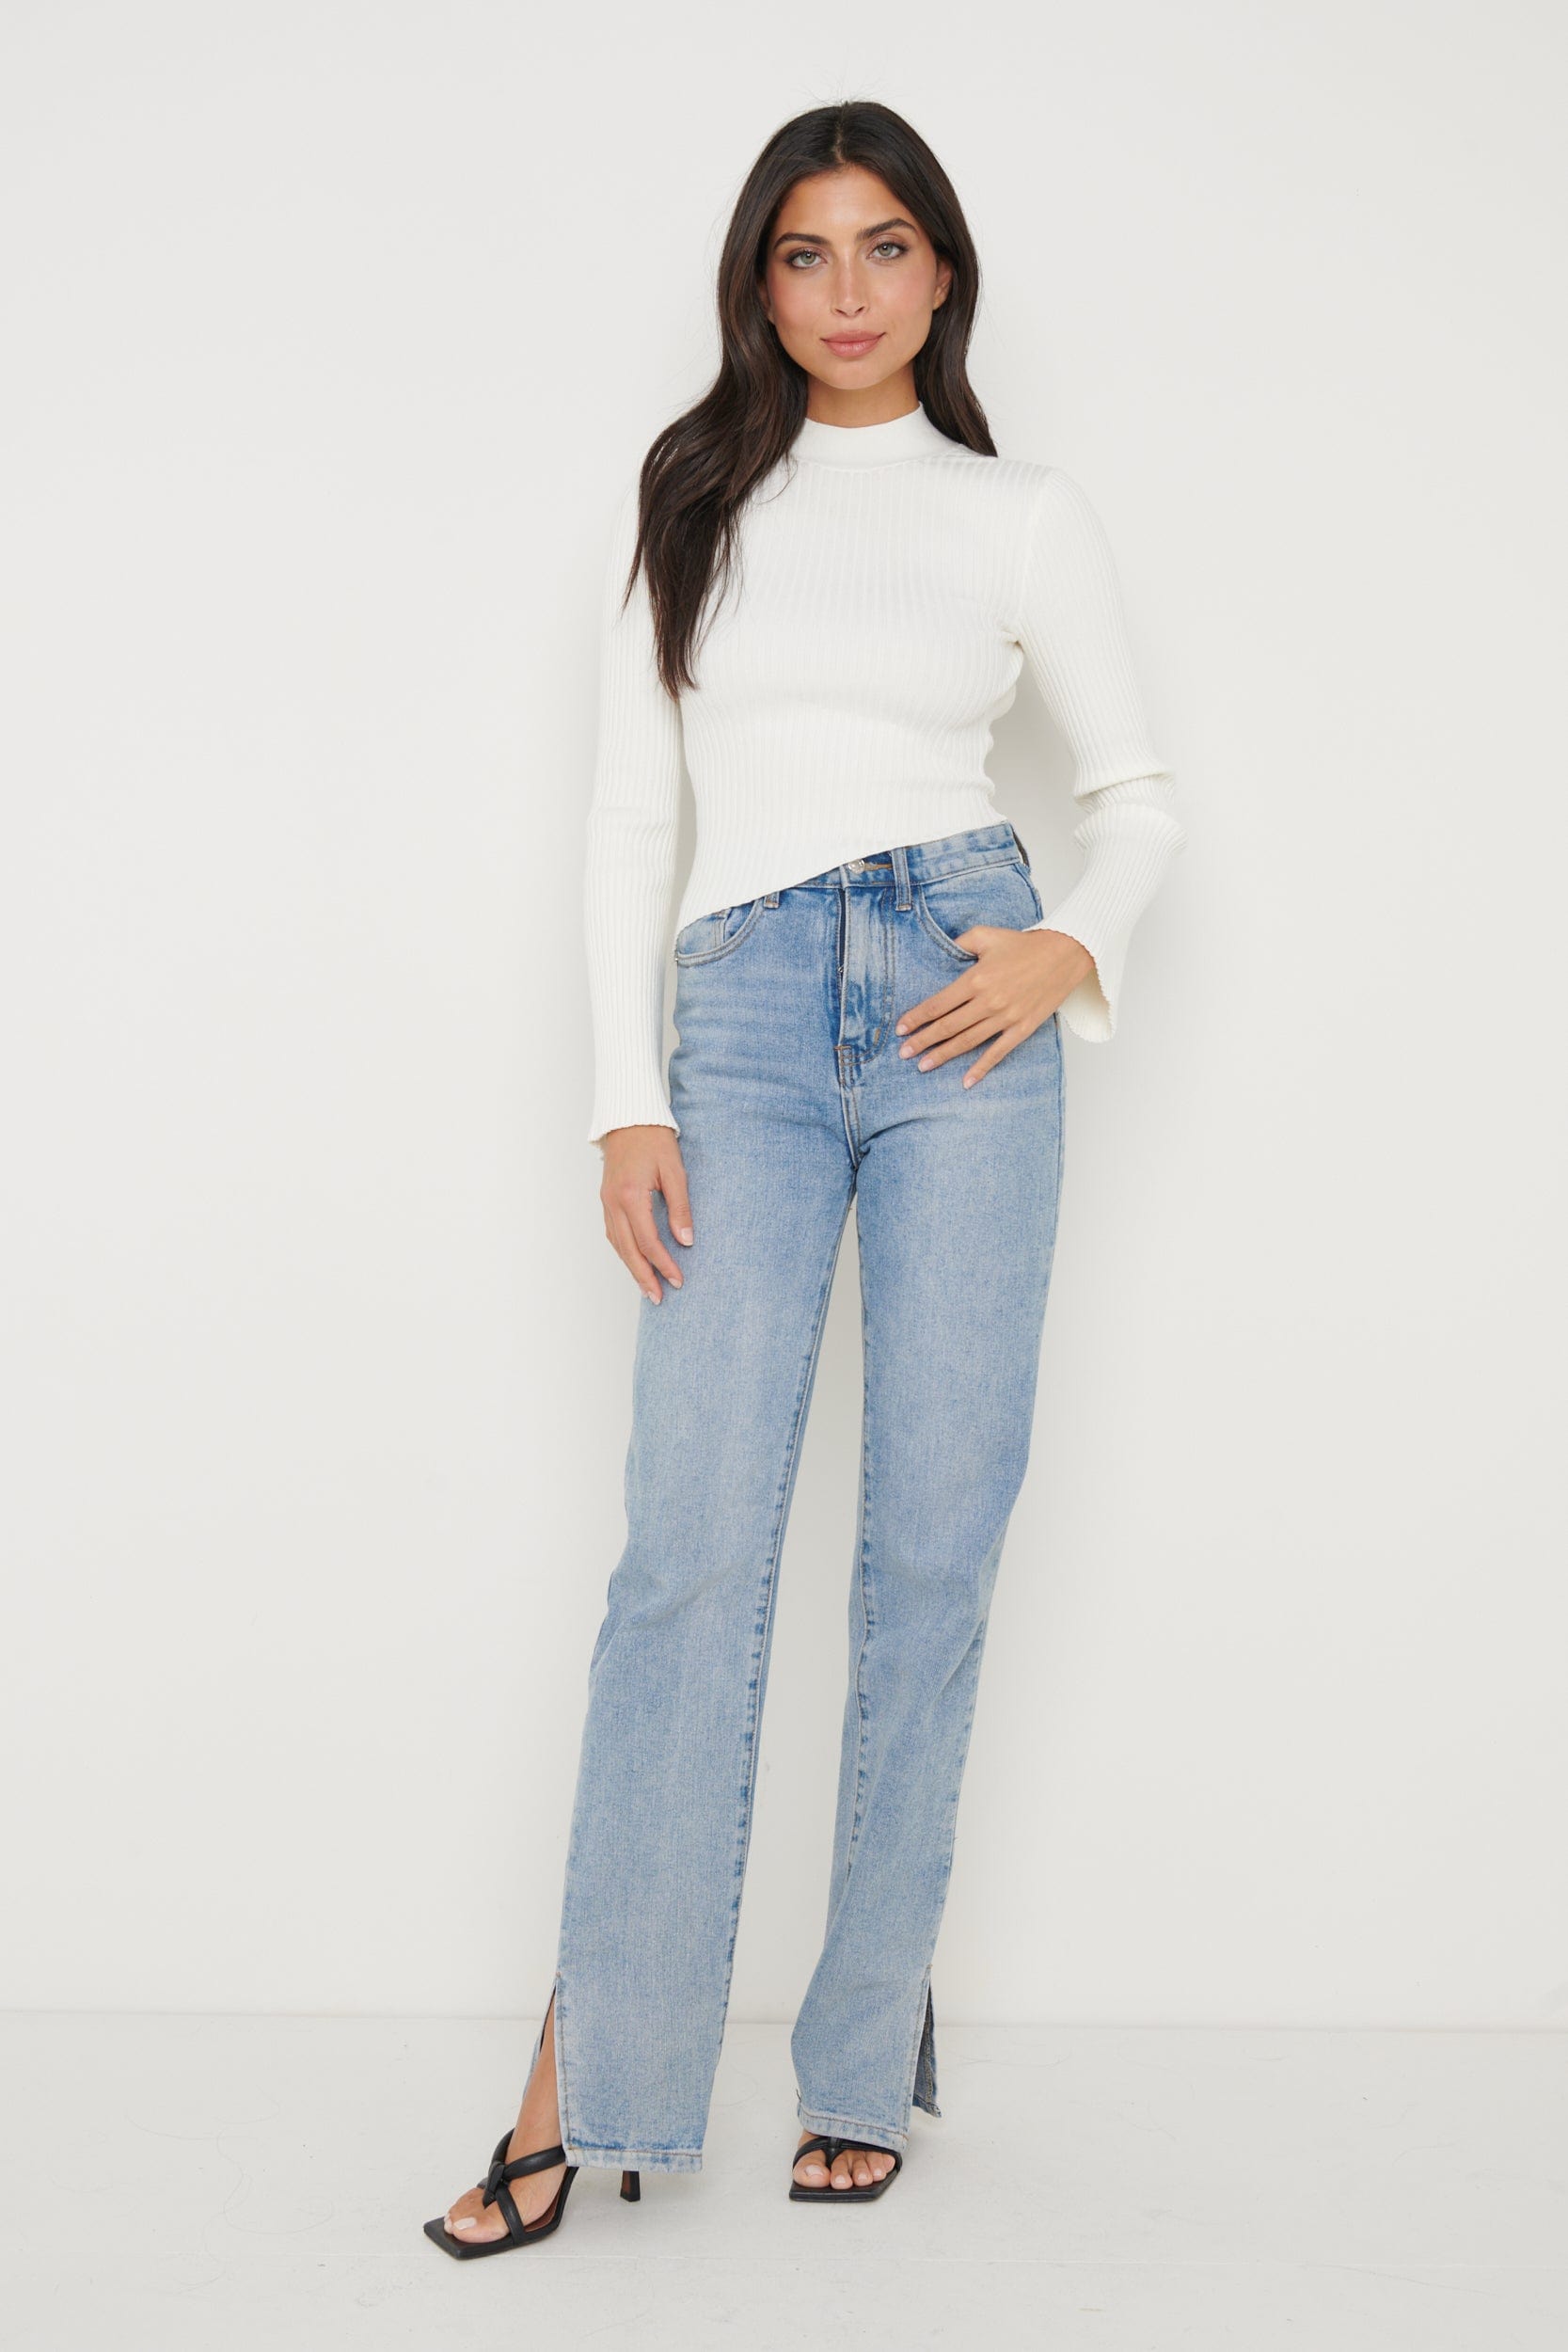 Lakelyn Backless High Neck Knit Top - Cream